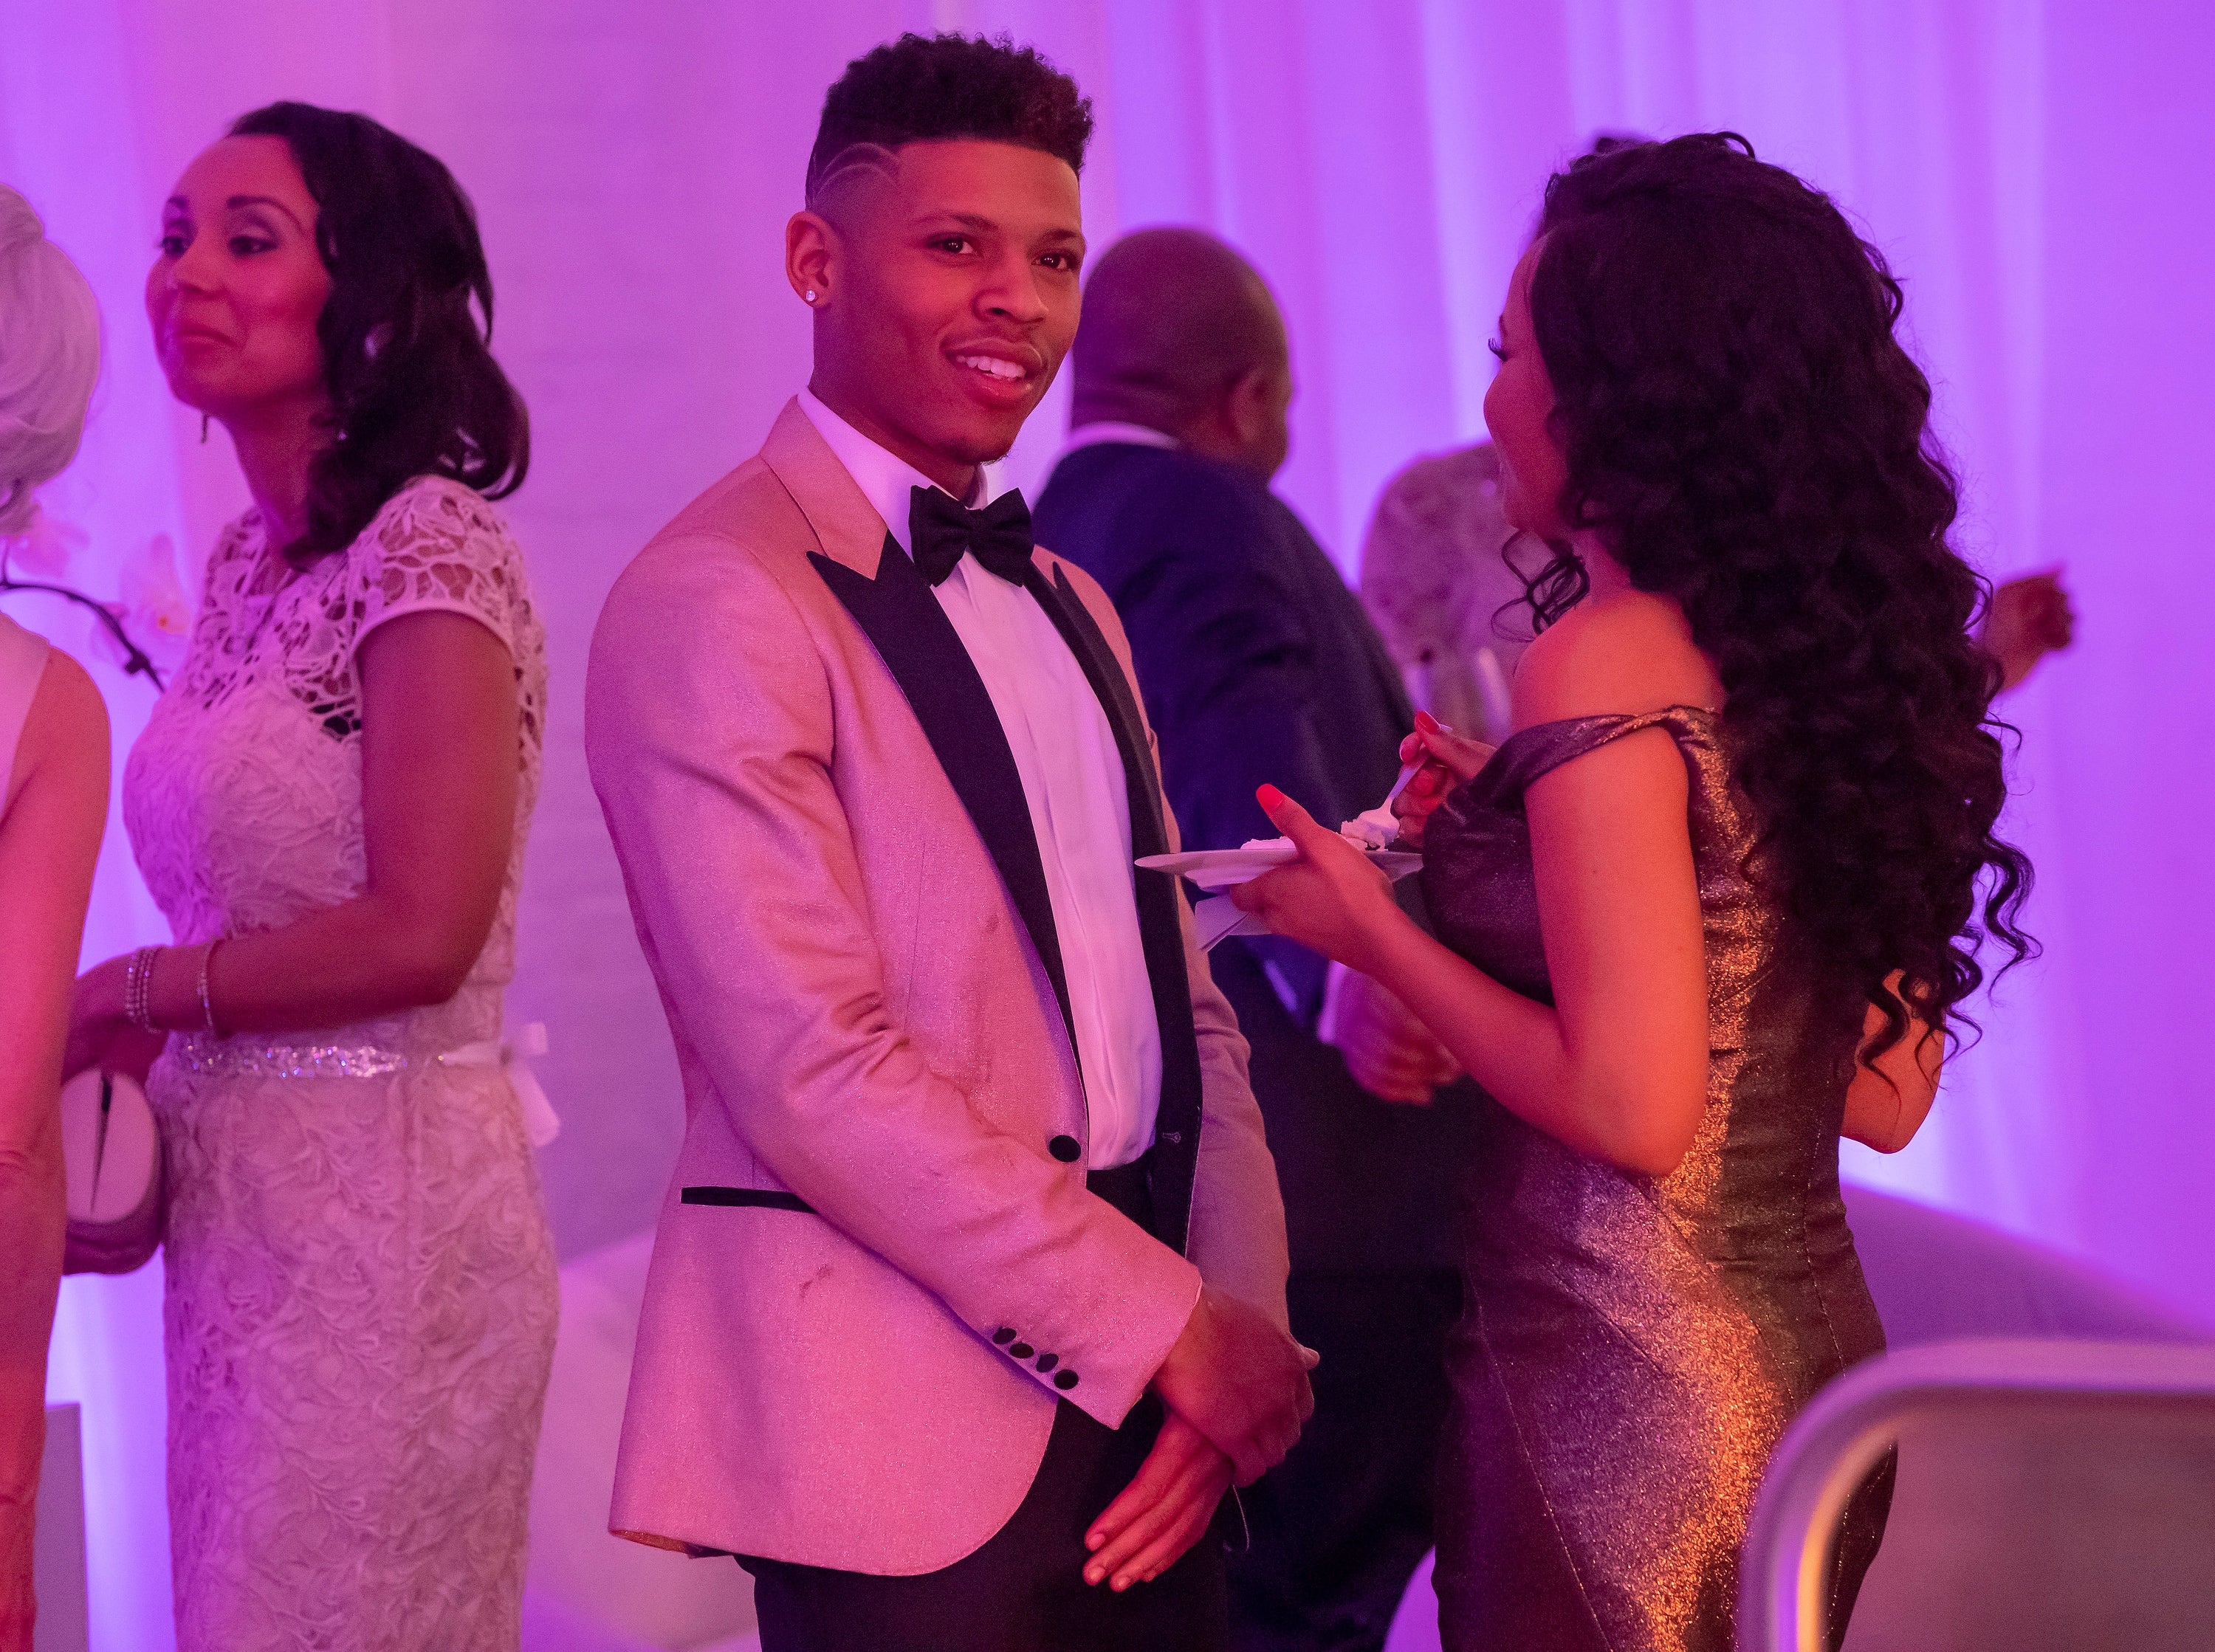 'Empire' Star Bryshere Gray Questioned Over 7-Eleven Food Fight